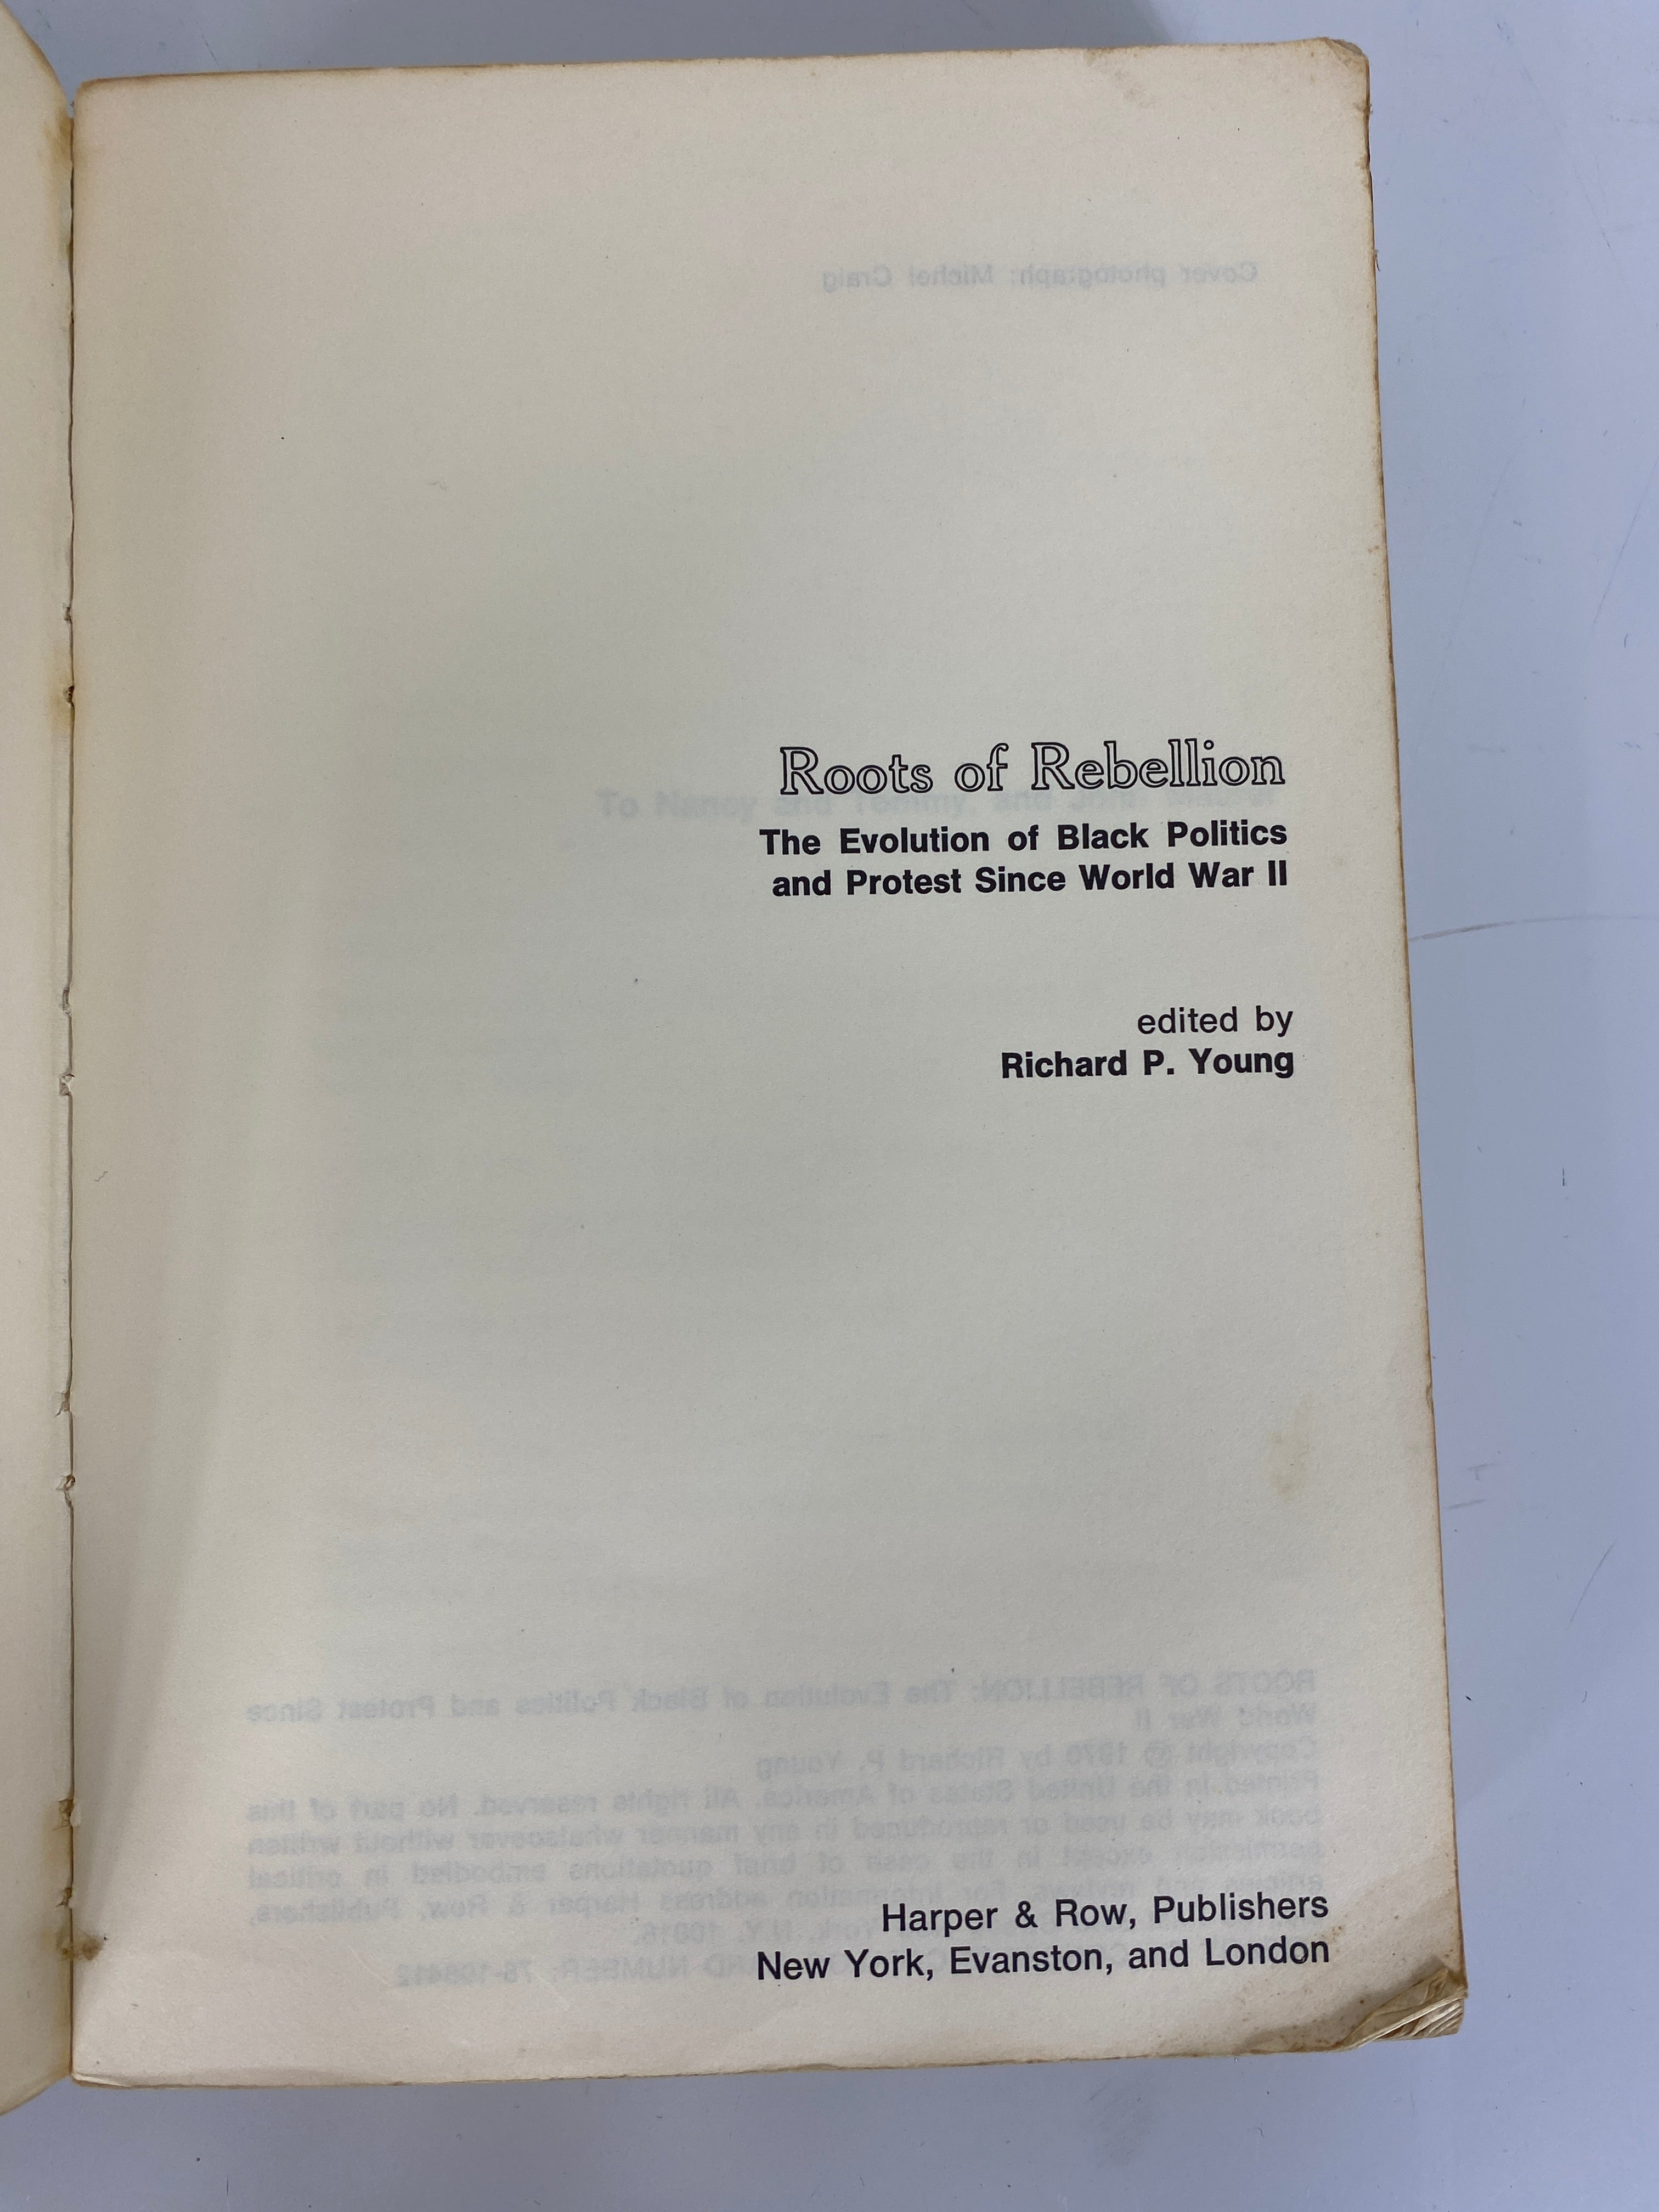 Roots of Rebellion by Richard P. Young 1970 SC